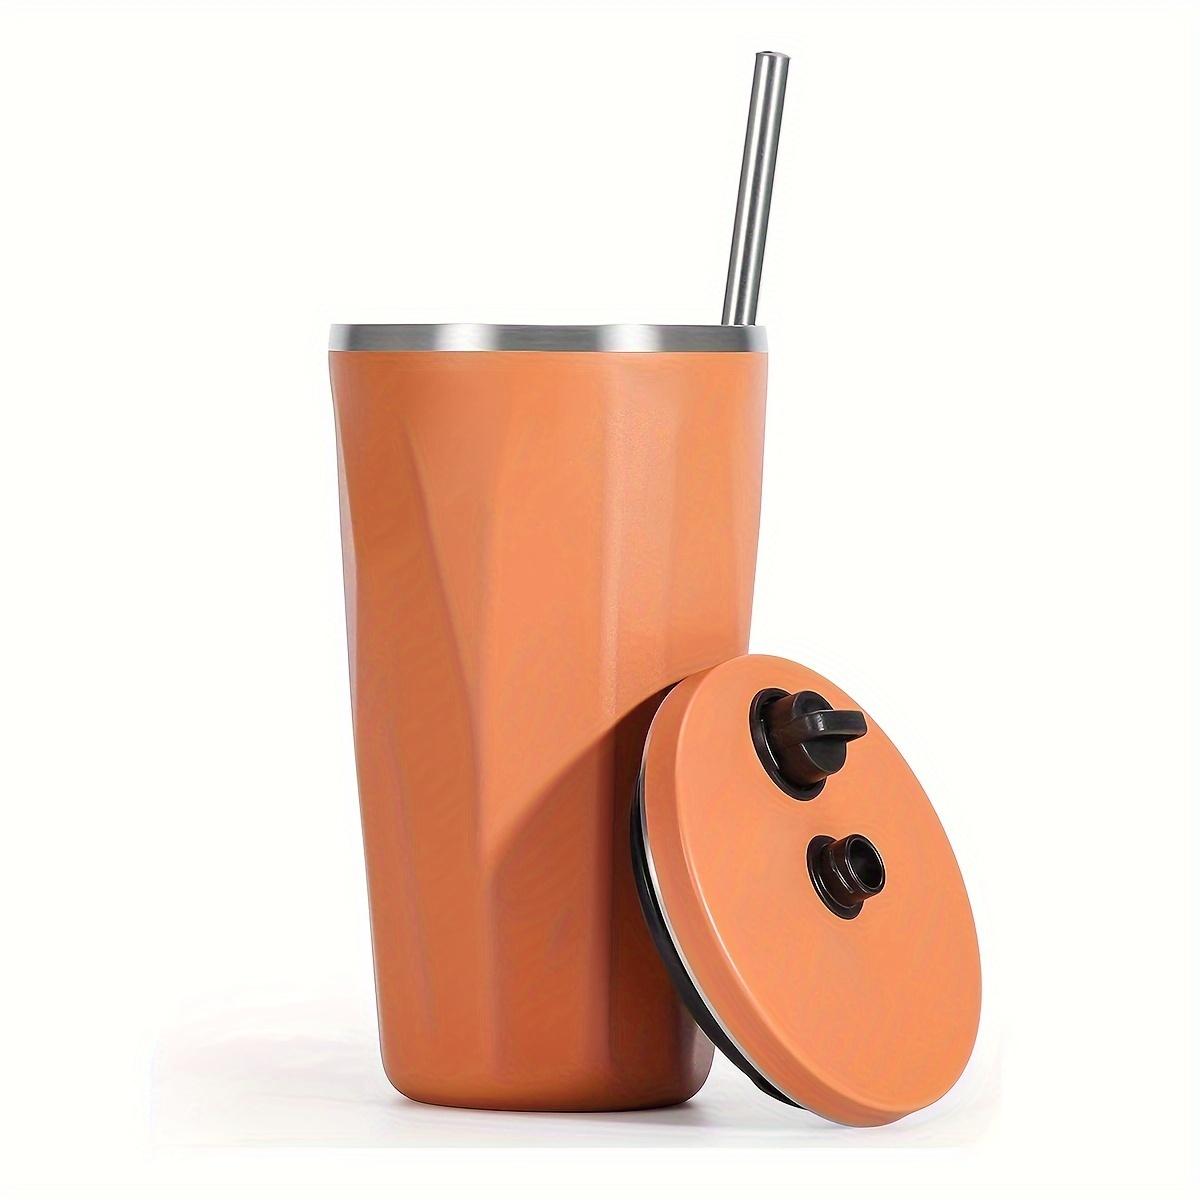 Portable Insulated Tumbler Cup With Leak-proof Lid And Straw